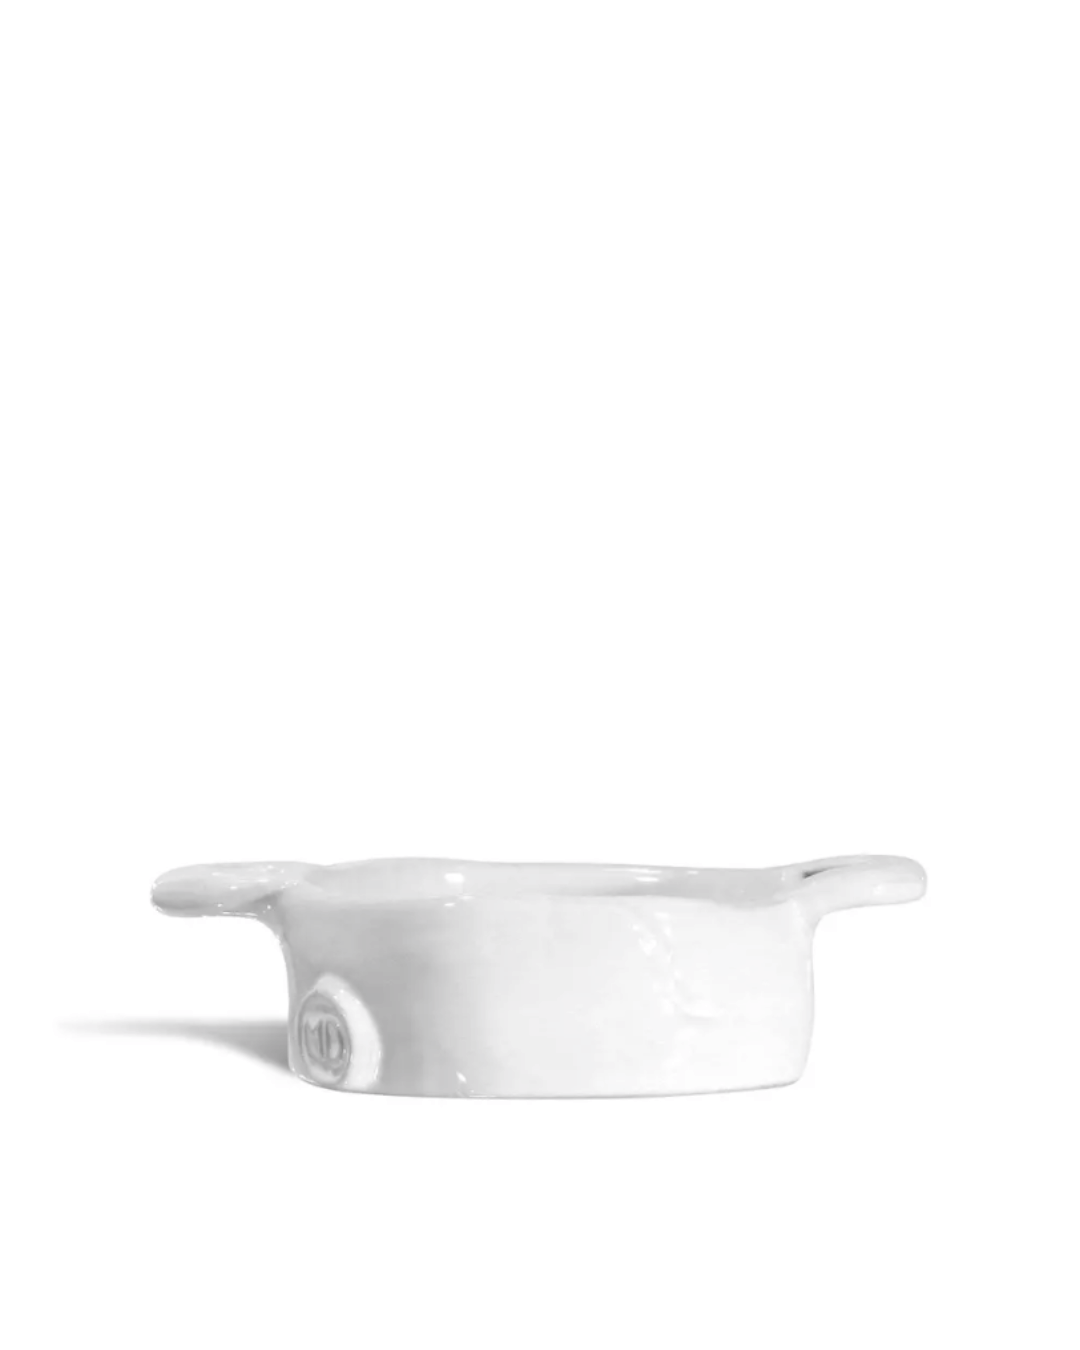 A Montes Doggett Bowl No. 5 with handles, isolated on a white background, reminiscent of Scottsdale Arizona style.